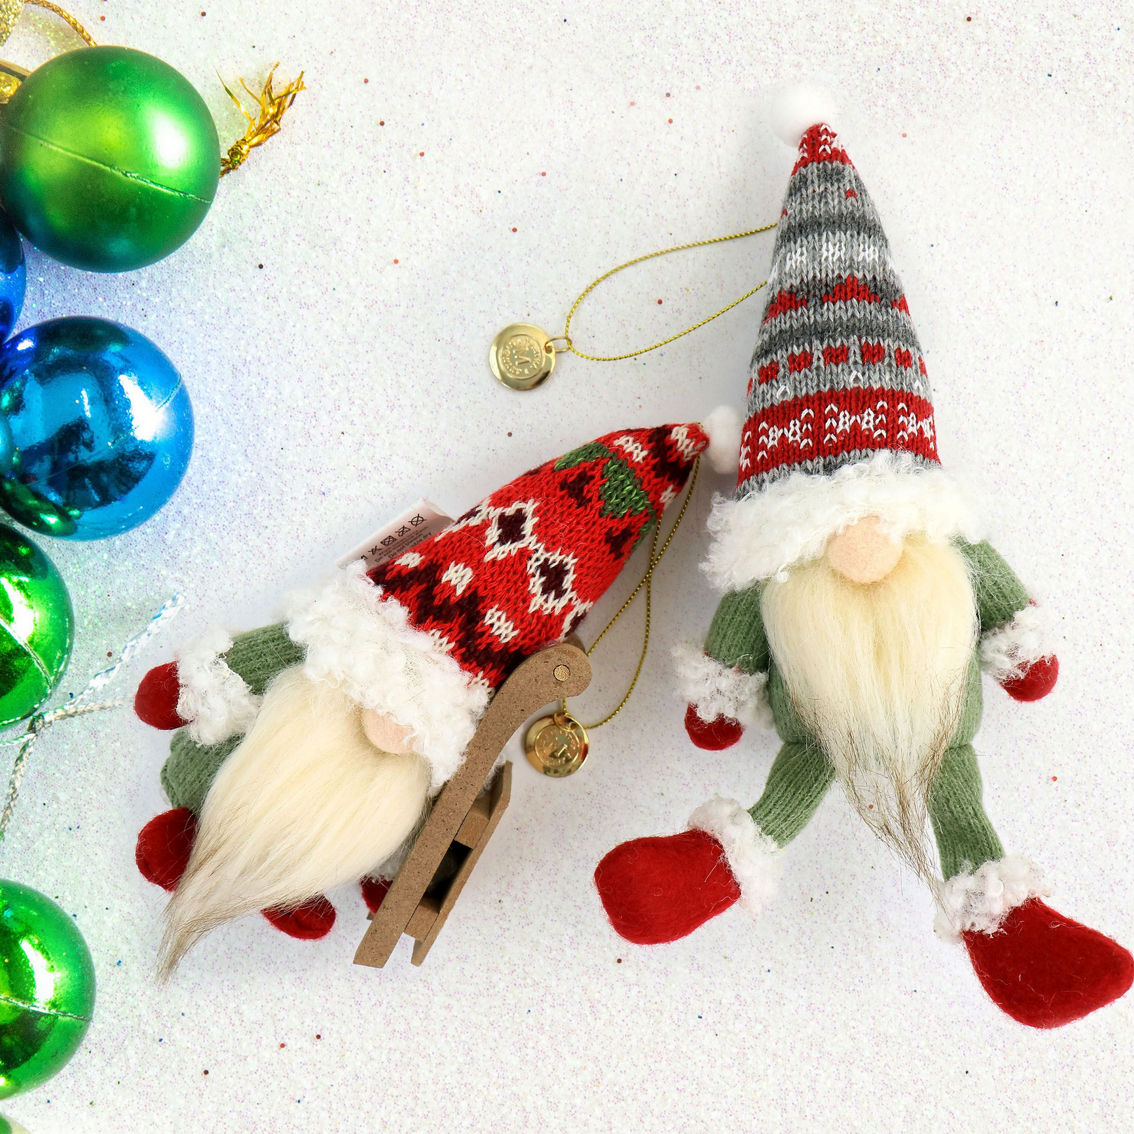 Martha Stewart Holiday Plush Gnome 2 Piece Ornament Set in Green and Red - Image 4 of 4